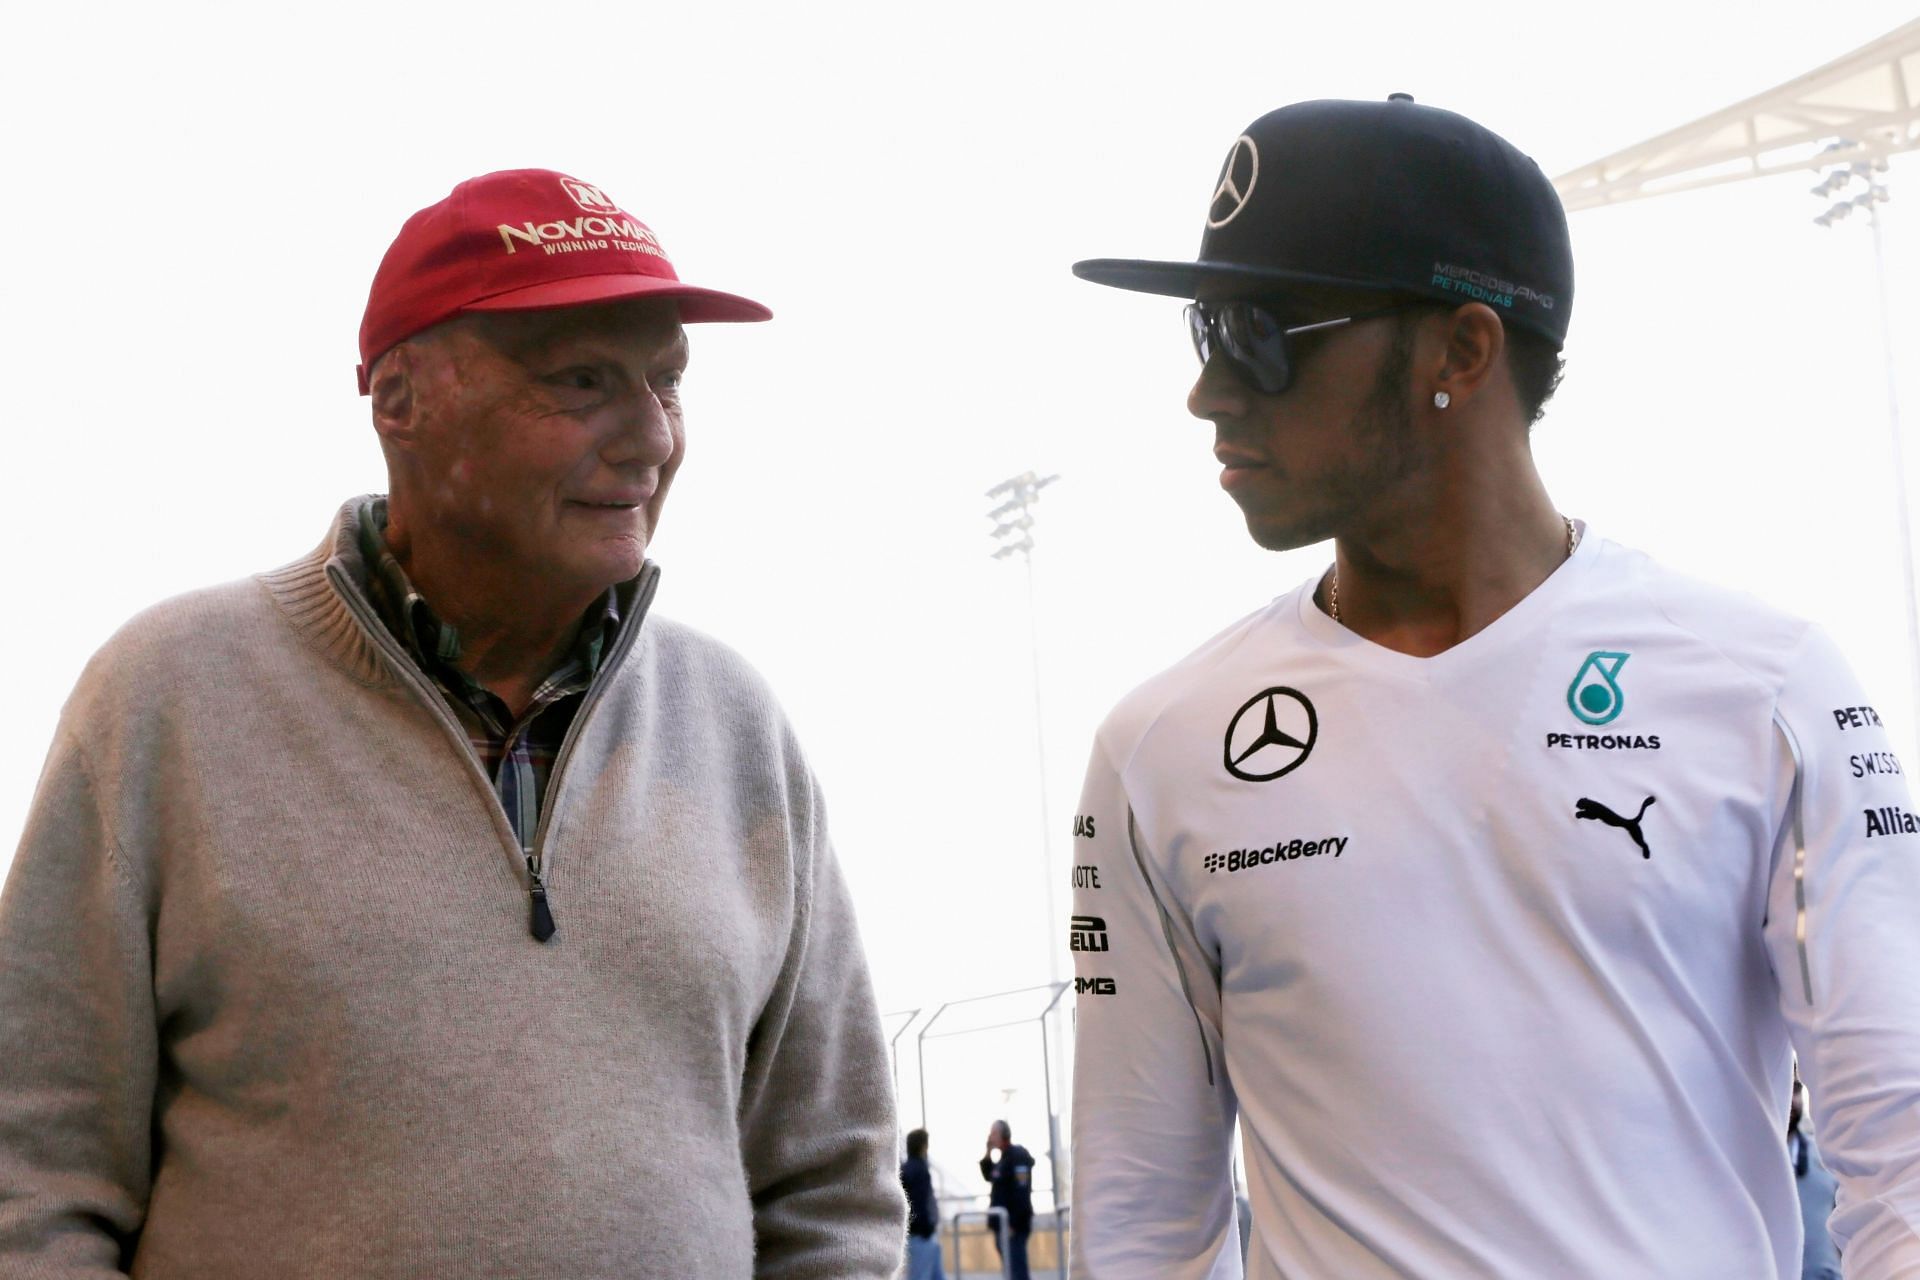 BAHRAIN, BAHRAIN - FEBRUARY 20: Niki Lauda the non-executive chairman of the Mercedes AMG Petronas F1 Team is seen with Lewis Hamilton of Great Britain and Mercedes GP during day two of Formula One Winter Testing at the Bahrain International Circuit on February 20, 2014 in Bahrain, Bahrain. (Photo by Andrew Hone/Getty Images)